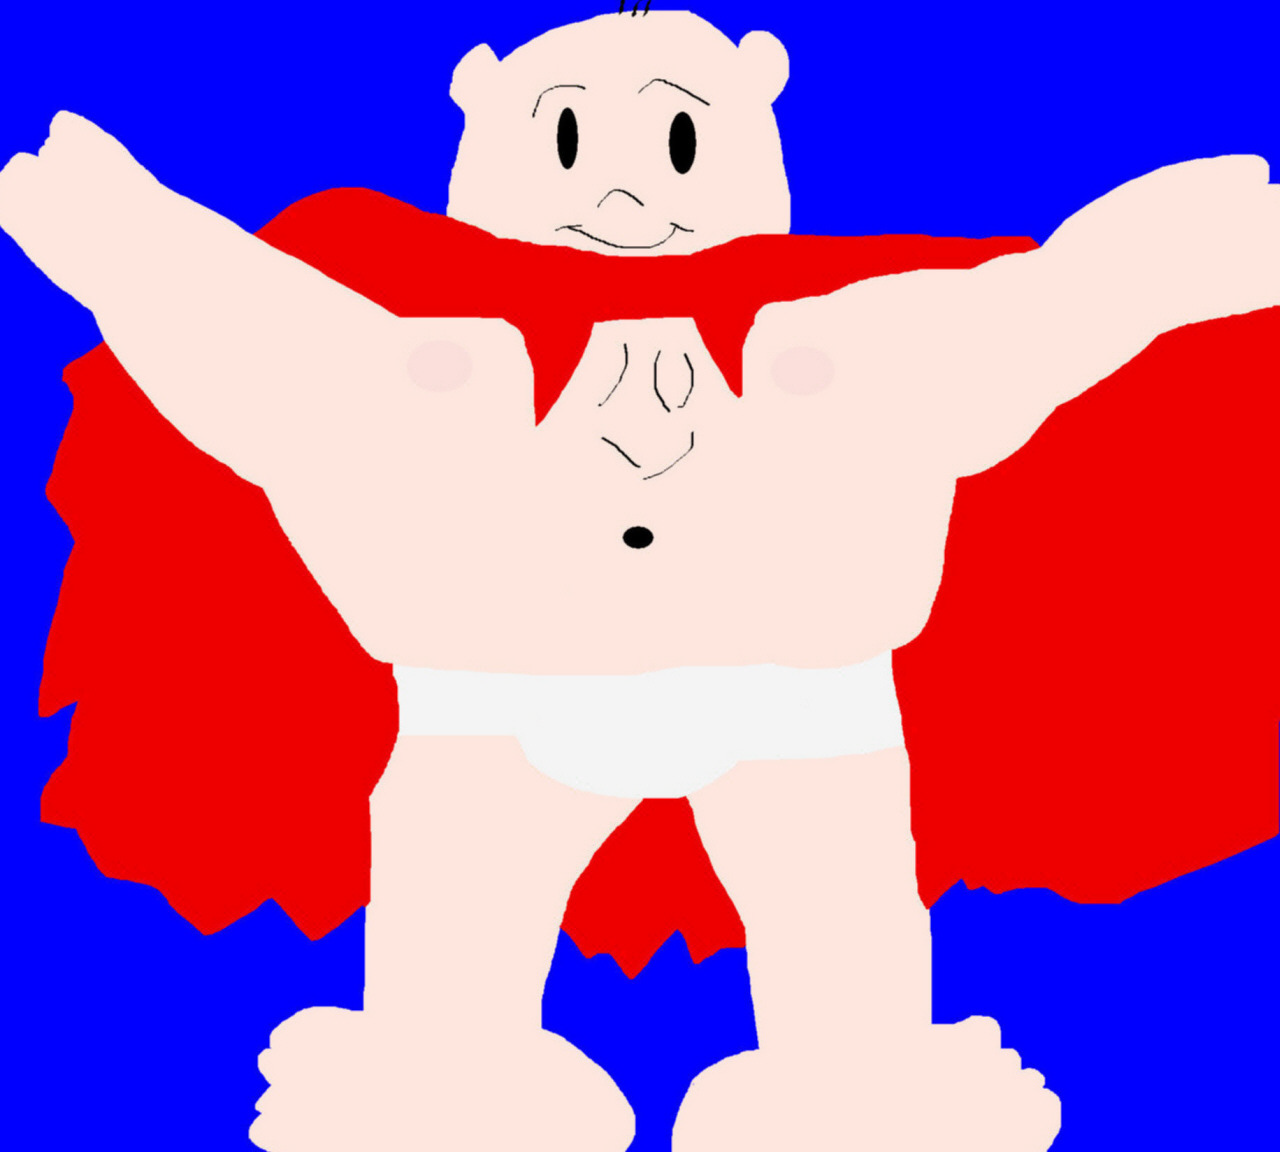 How to draw the Captain Underpants logo using MS Paint